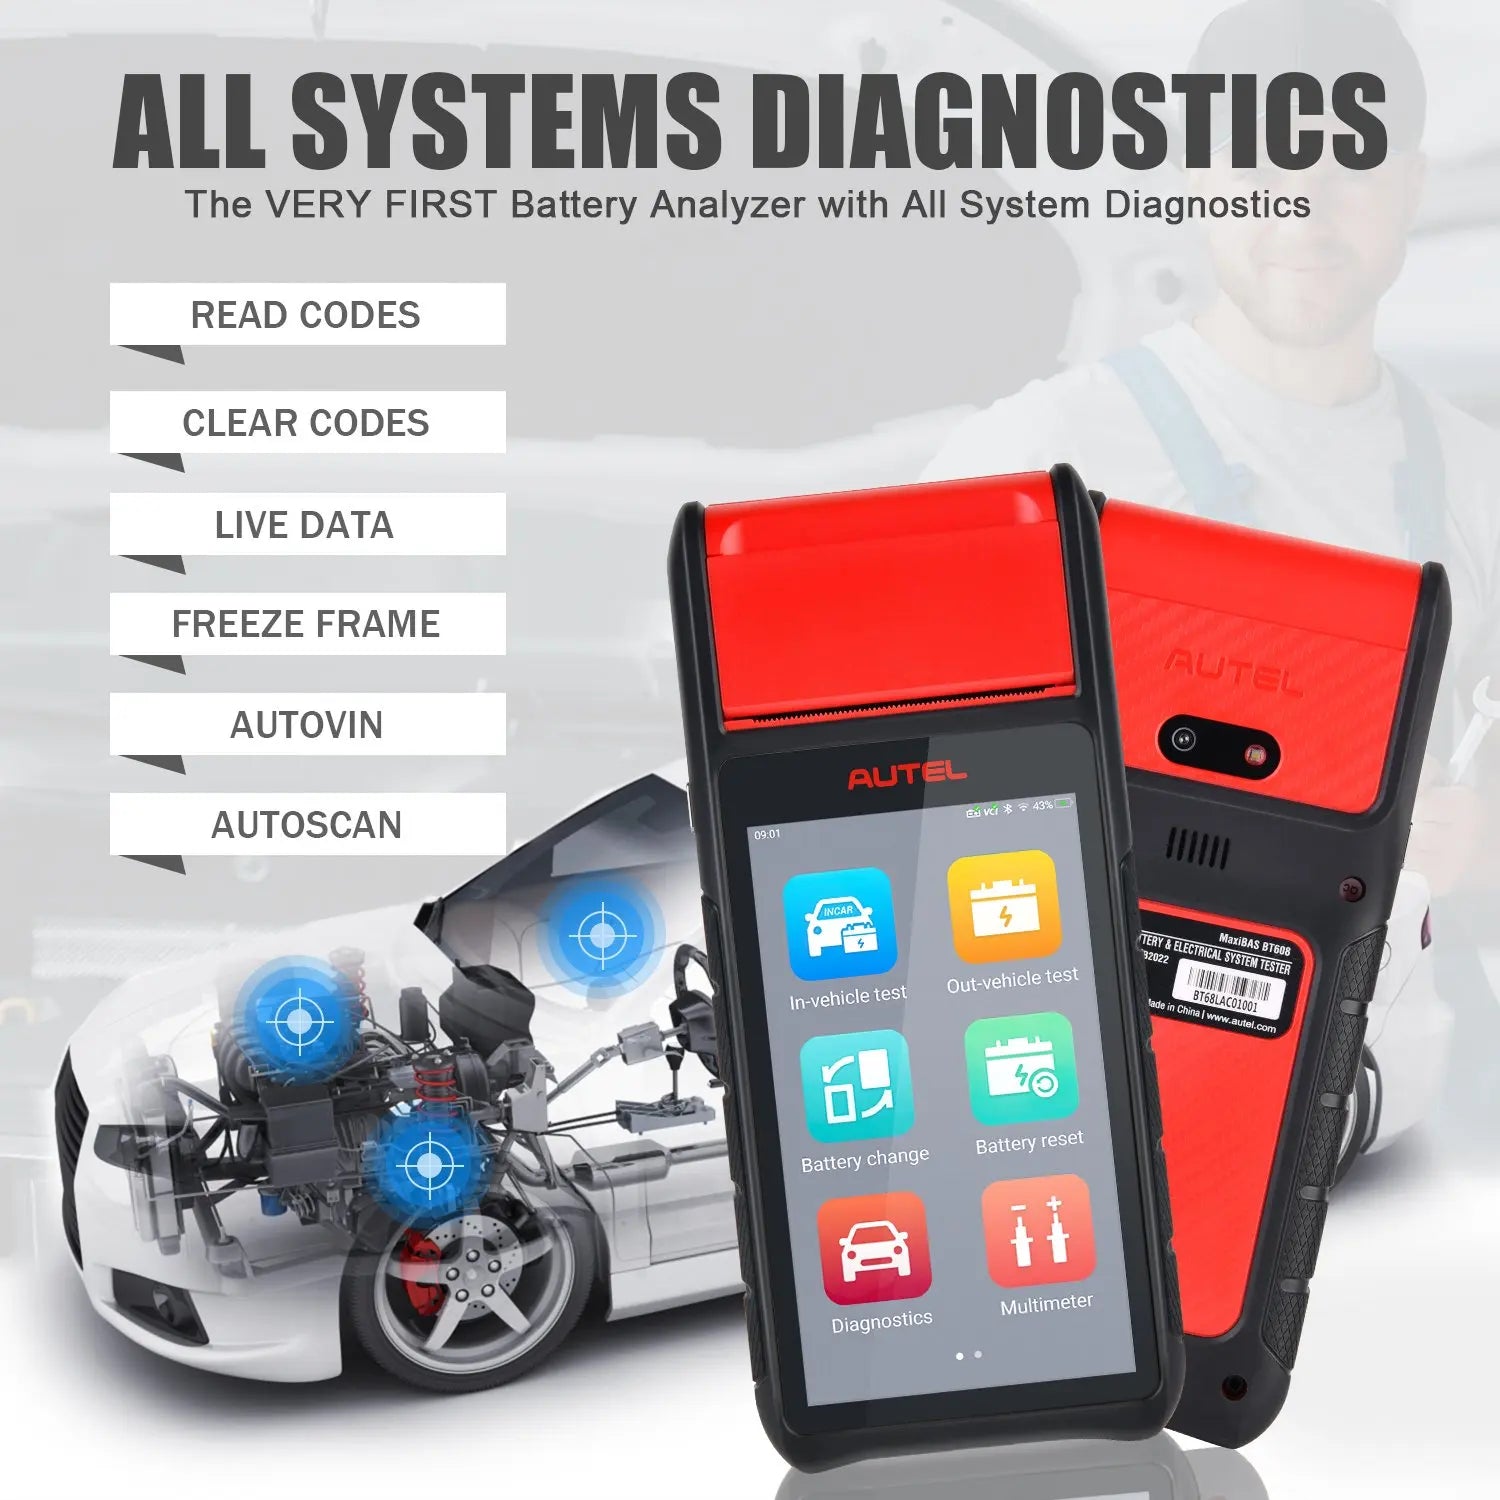 Autel MaxiBAS BT608 Auto Battery Tester Electrical System Analyzer Adaptive Conductance Techology All System Diagnostic Scanner - Dynamex